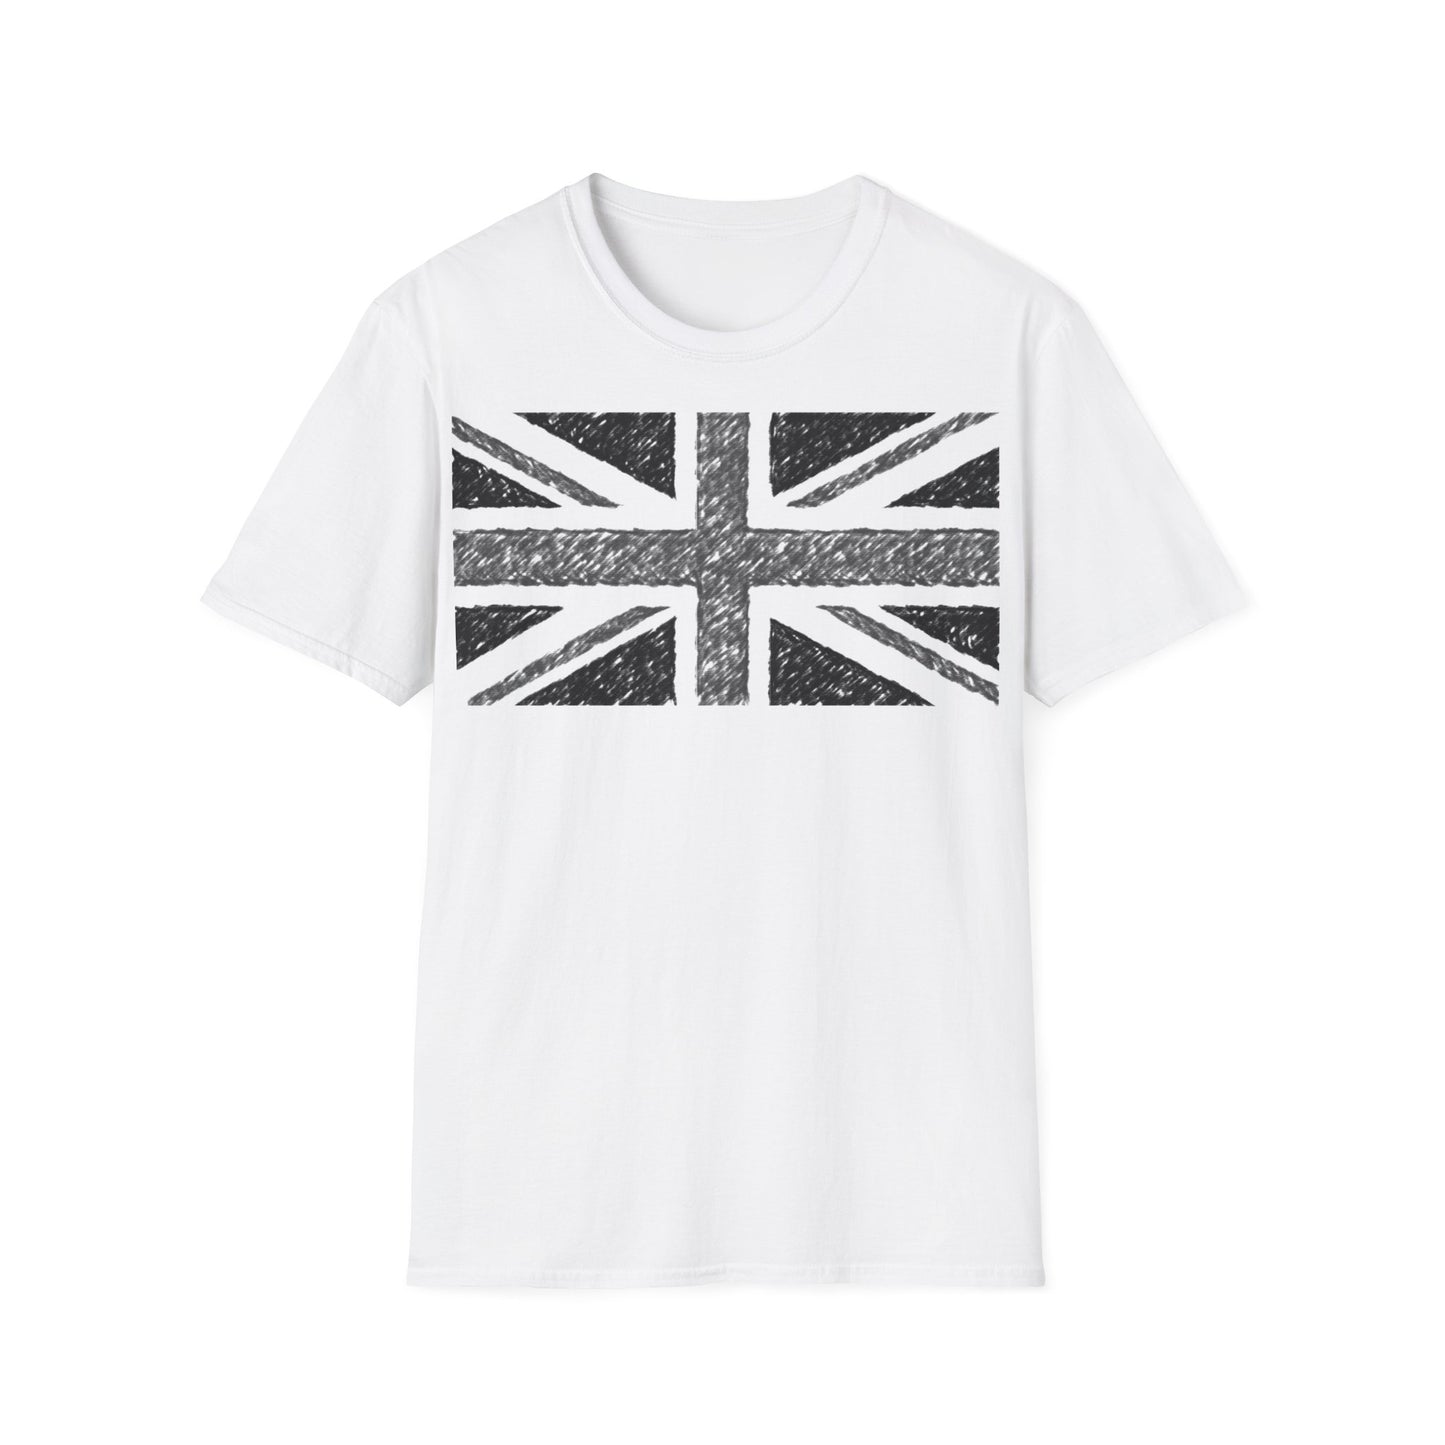 A white t-shirt with a design of a Union Jack flag done with a charcoal effect